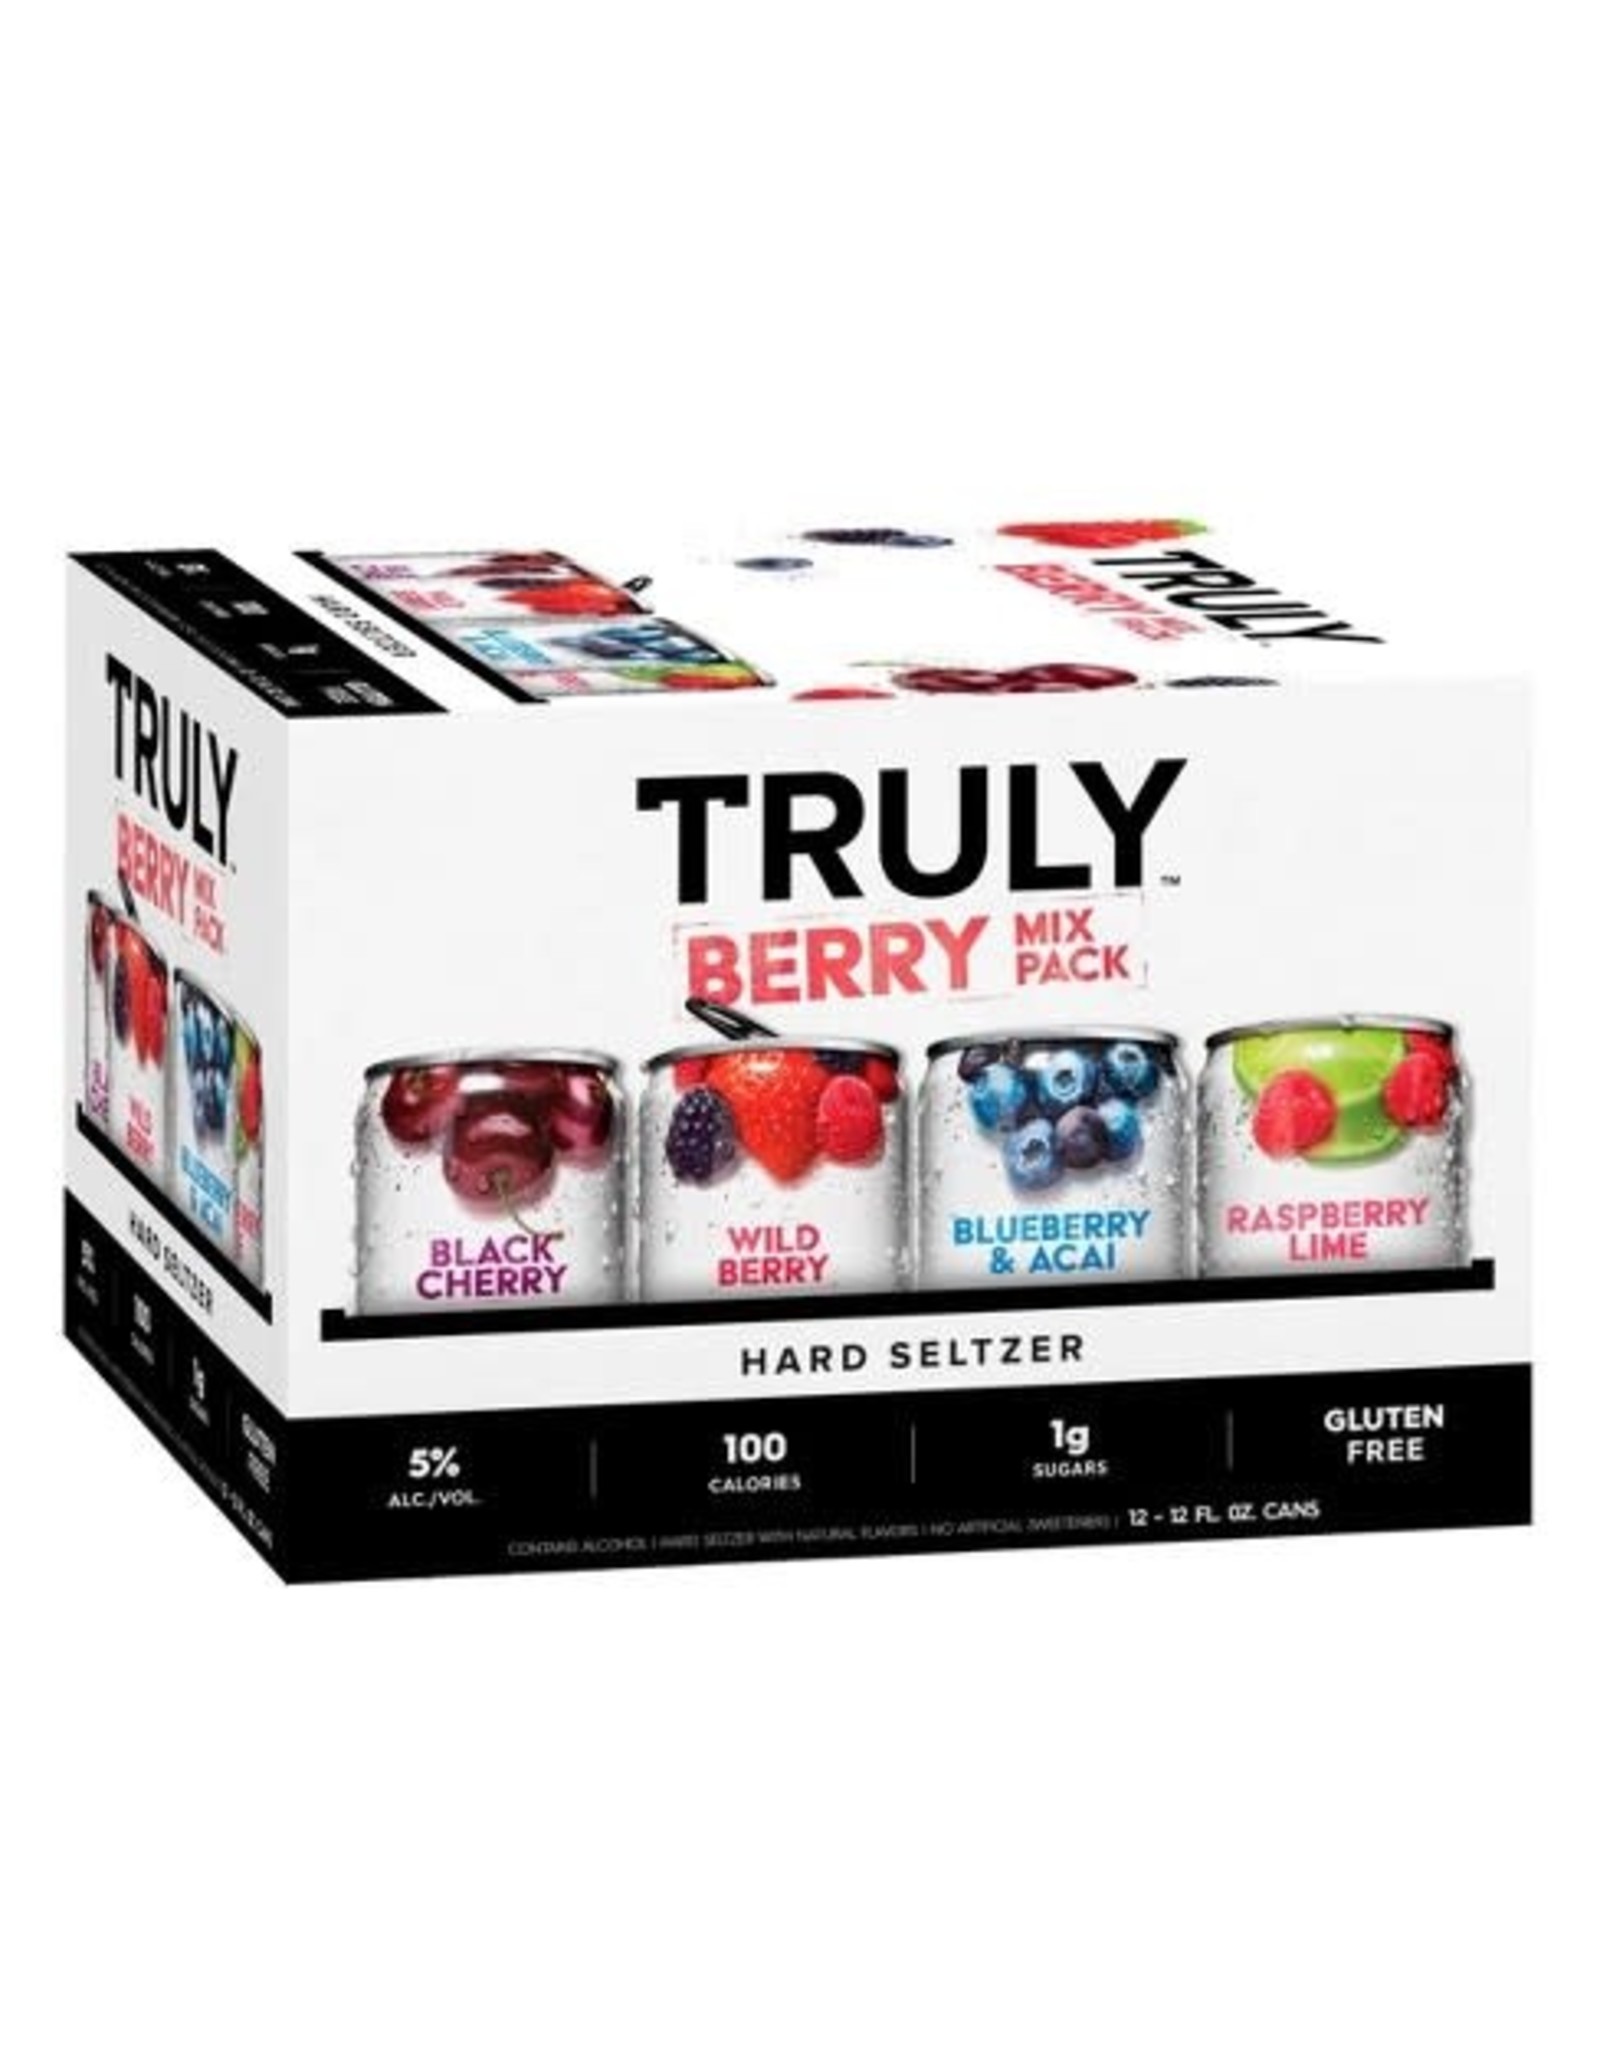 TRULY SPIKED SPARKLING BERRY VARIETY 2-12-12oz Can